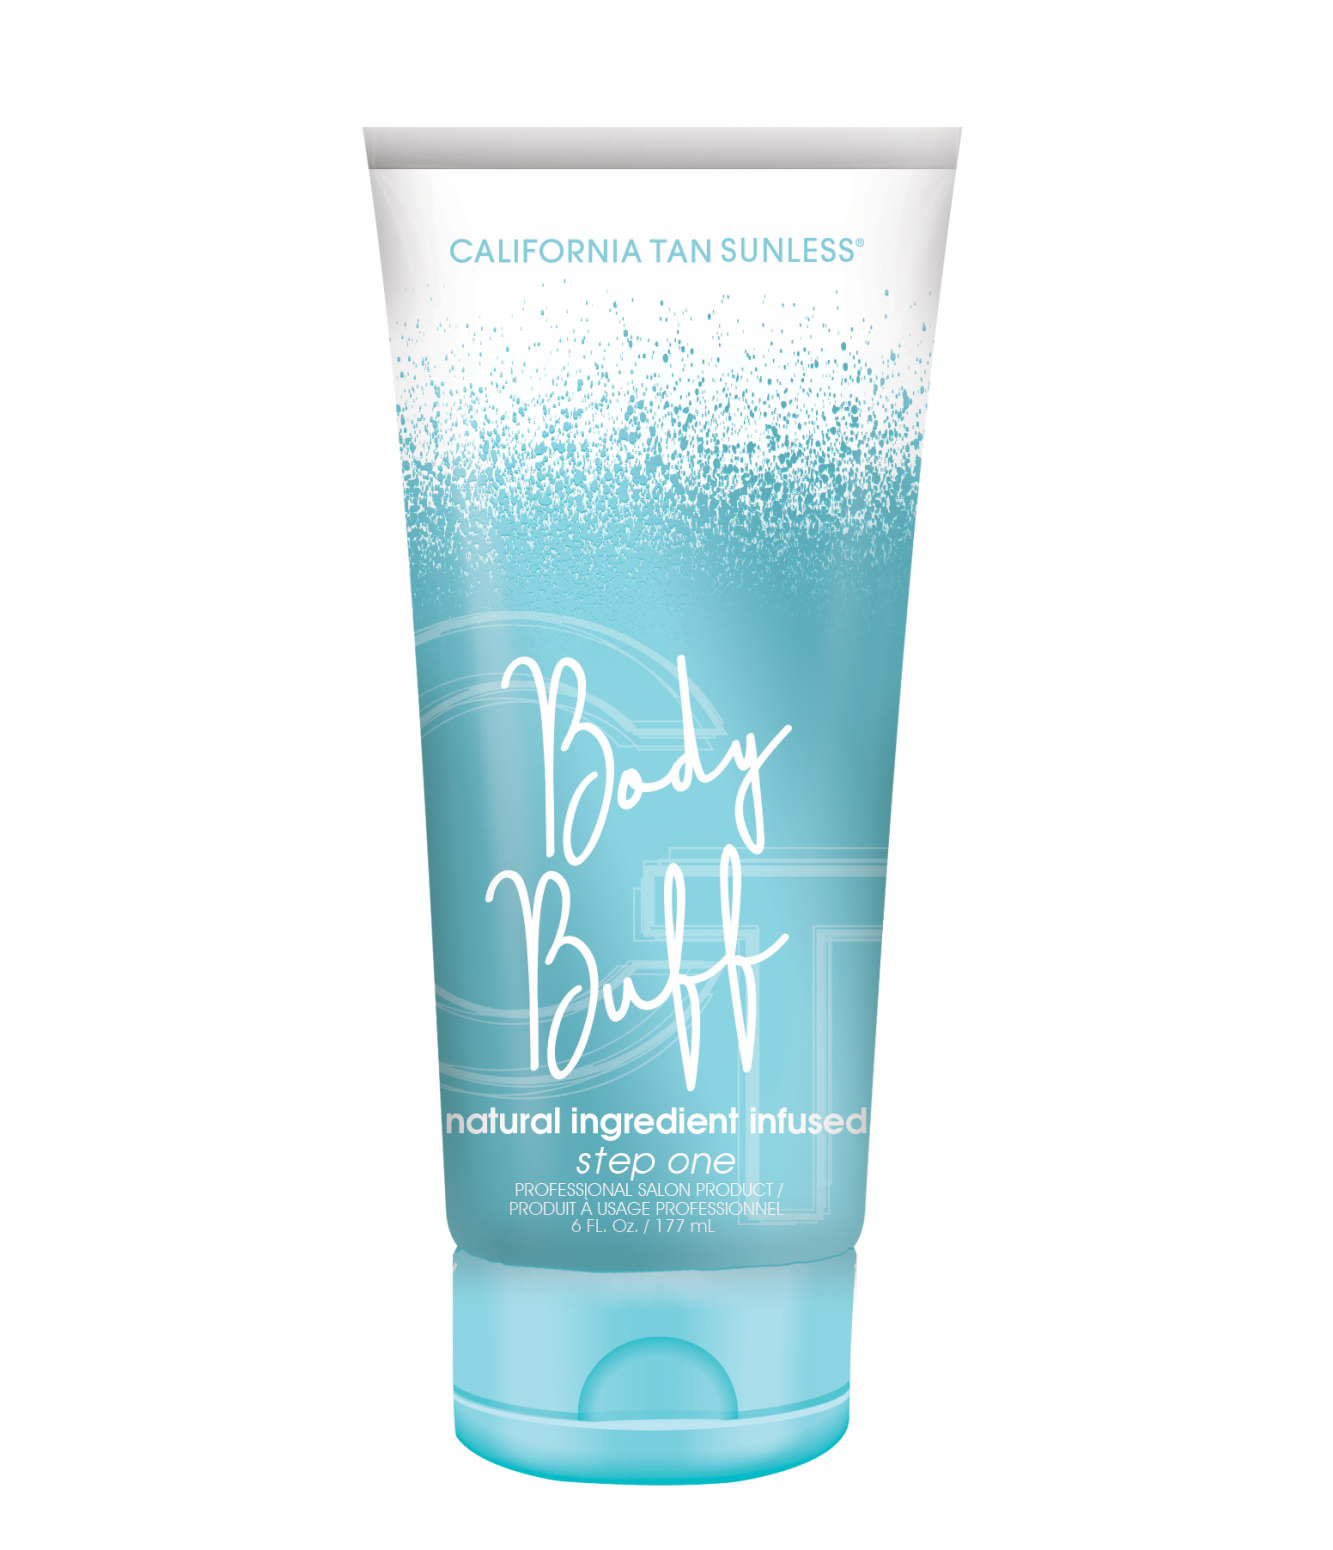 Primary image for California Tan Sunless Body Buff, 6 Oz.